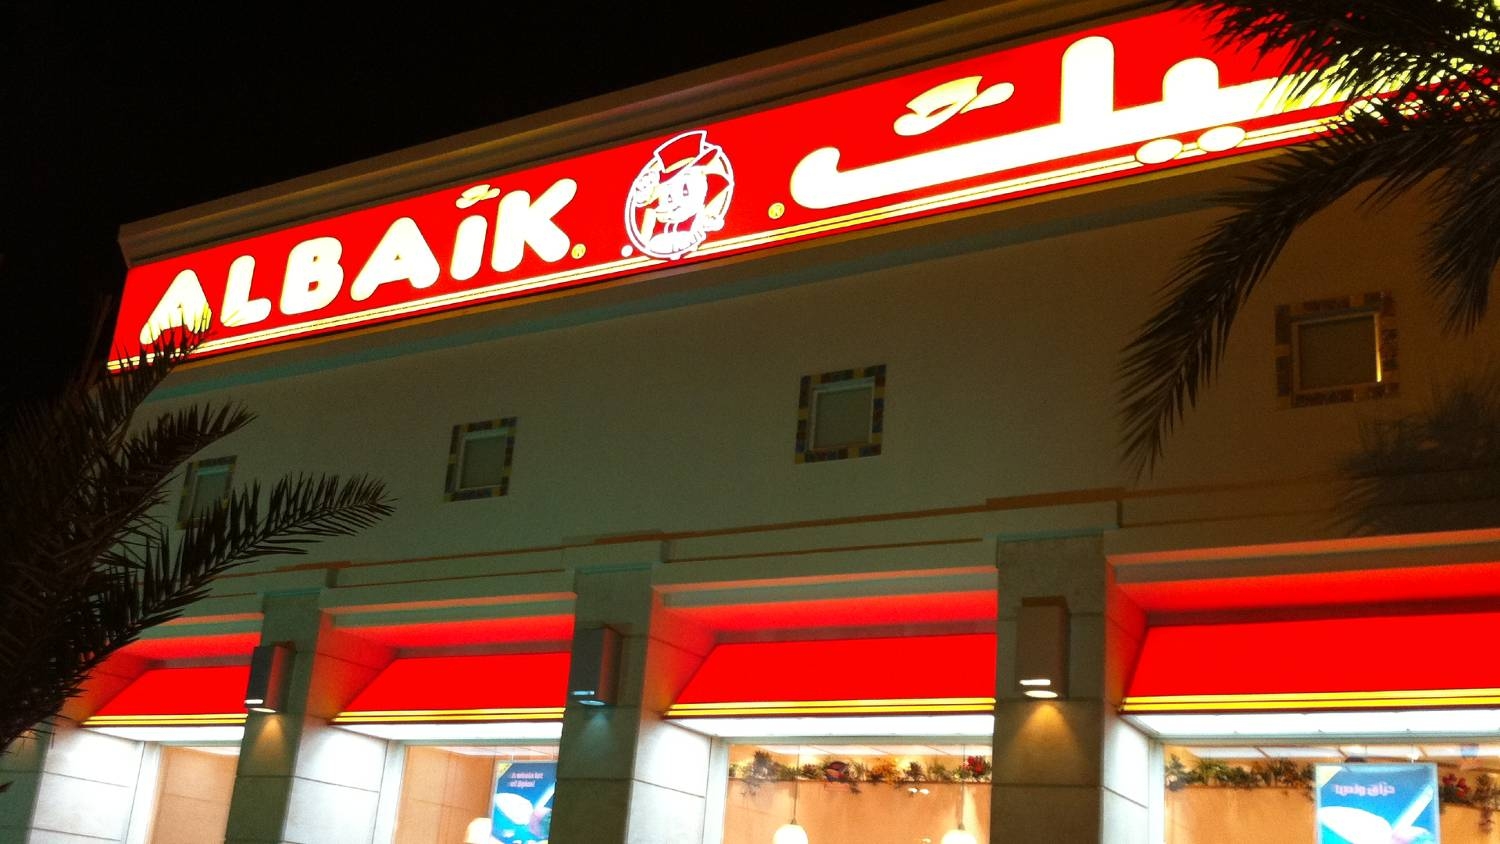 The original version of this chicken and chips shop opened in 1974, there are now 120 branches across Saudi Arabia (Wikipedia)